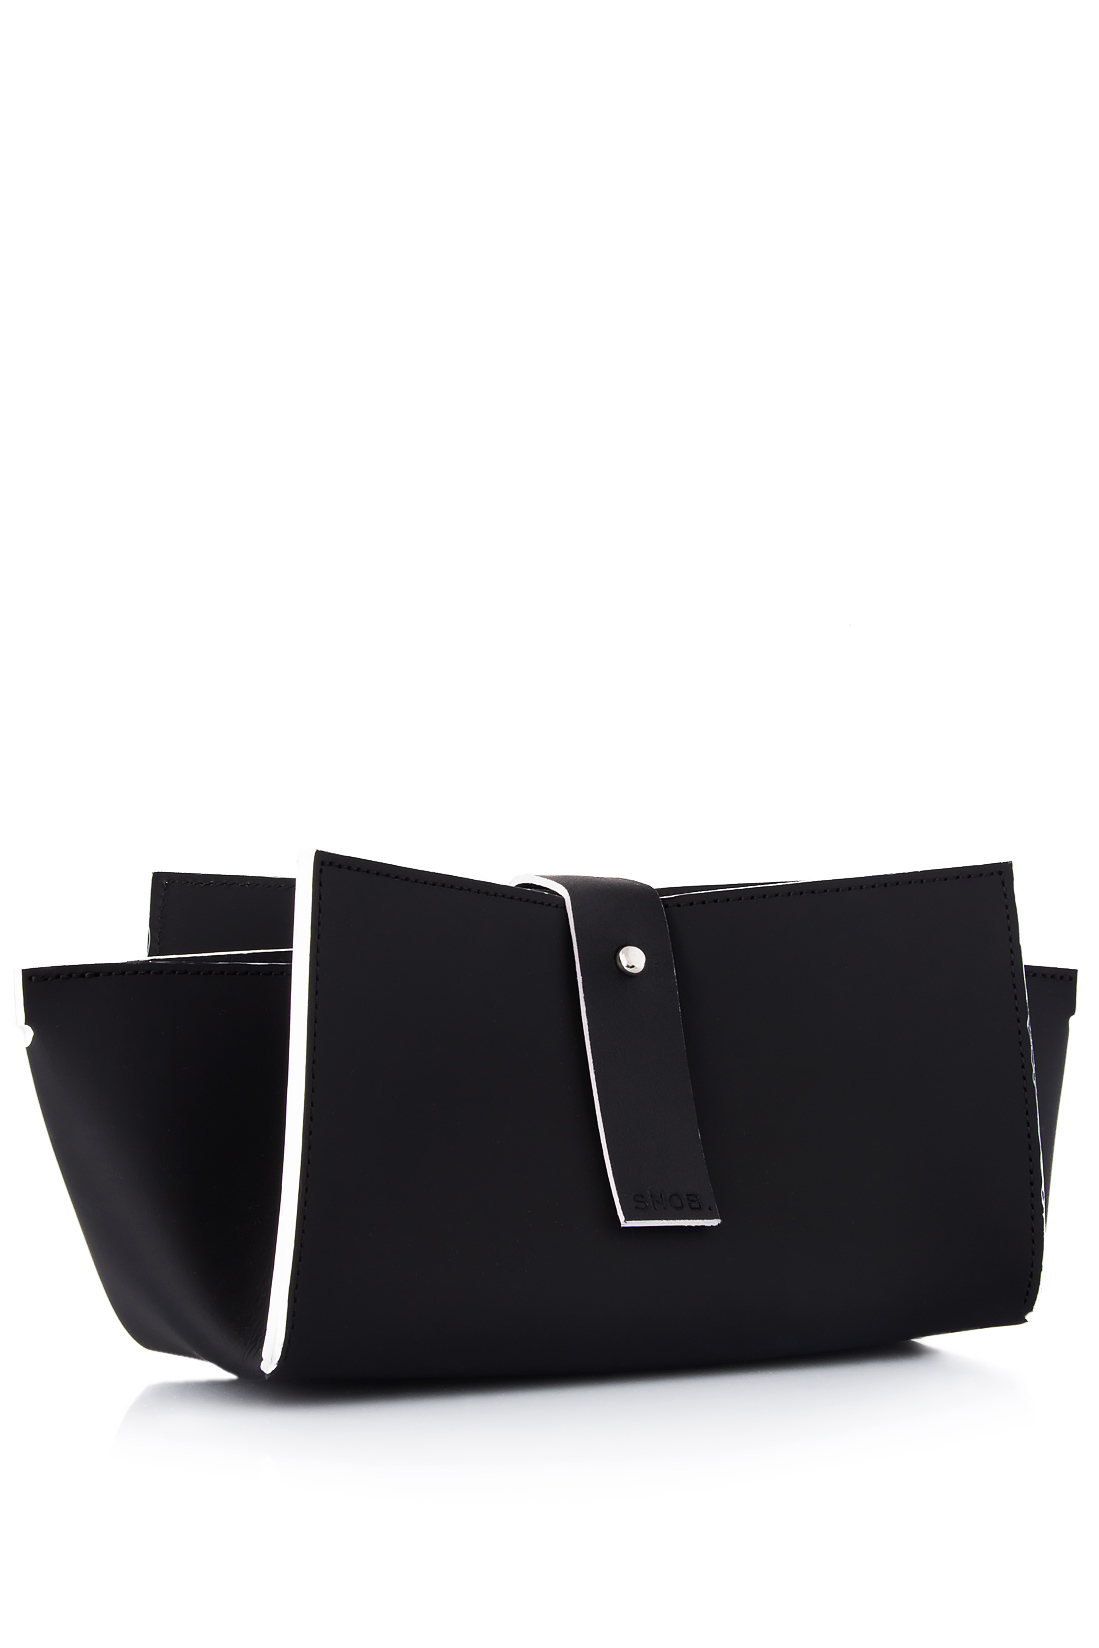 Origami recycled leather clutch Snob. image 1